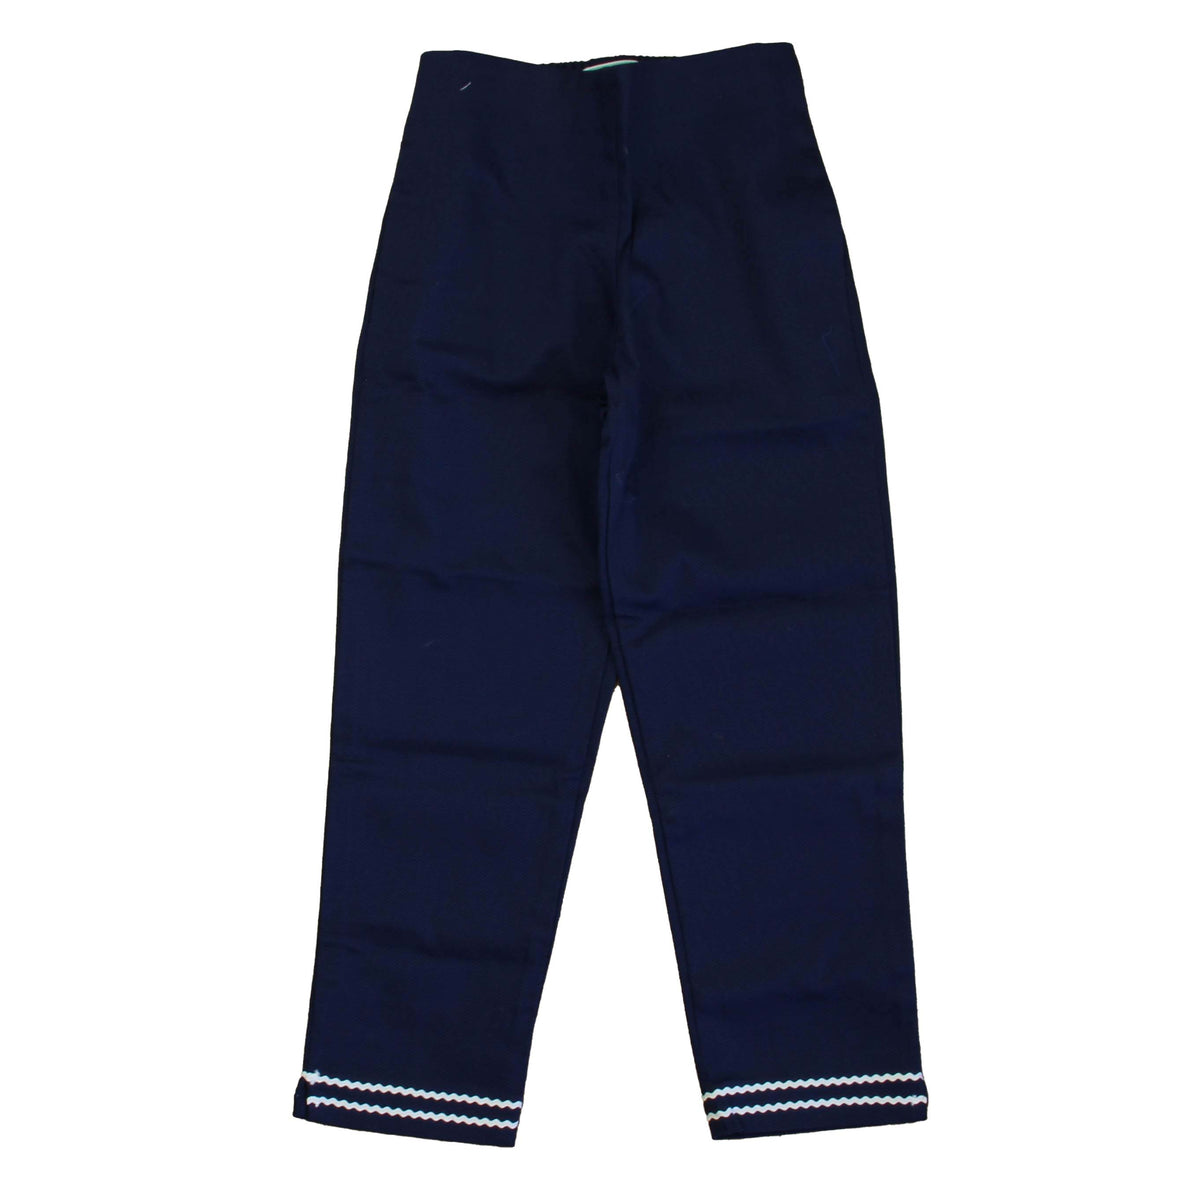 New with Tags: Navy Blue Pants -- FINAL SALE